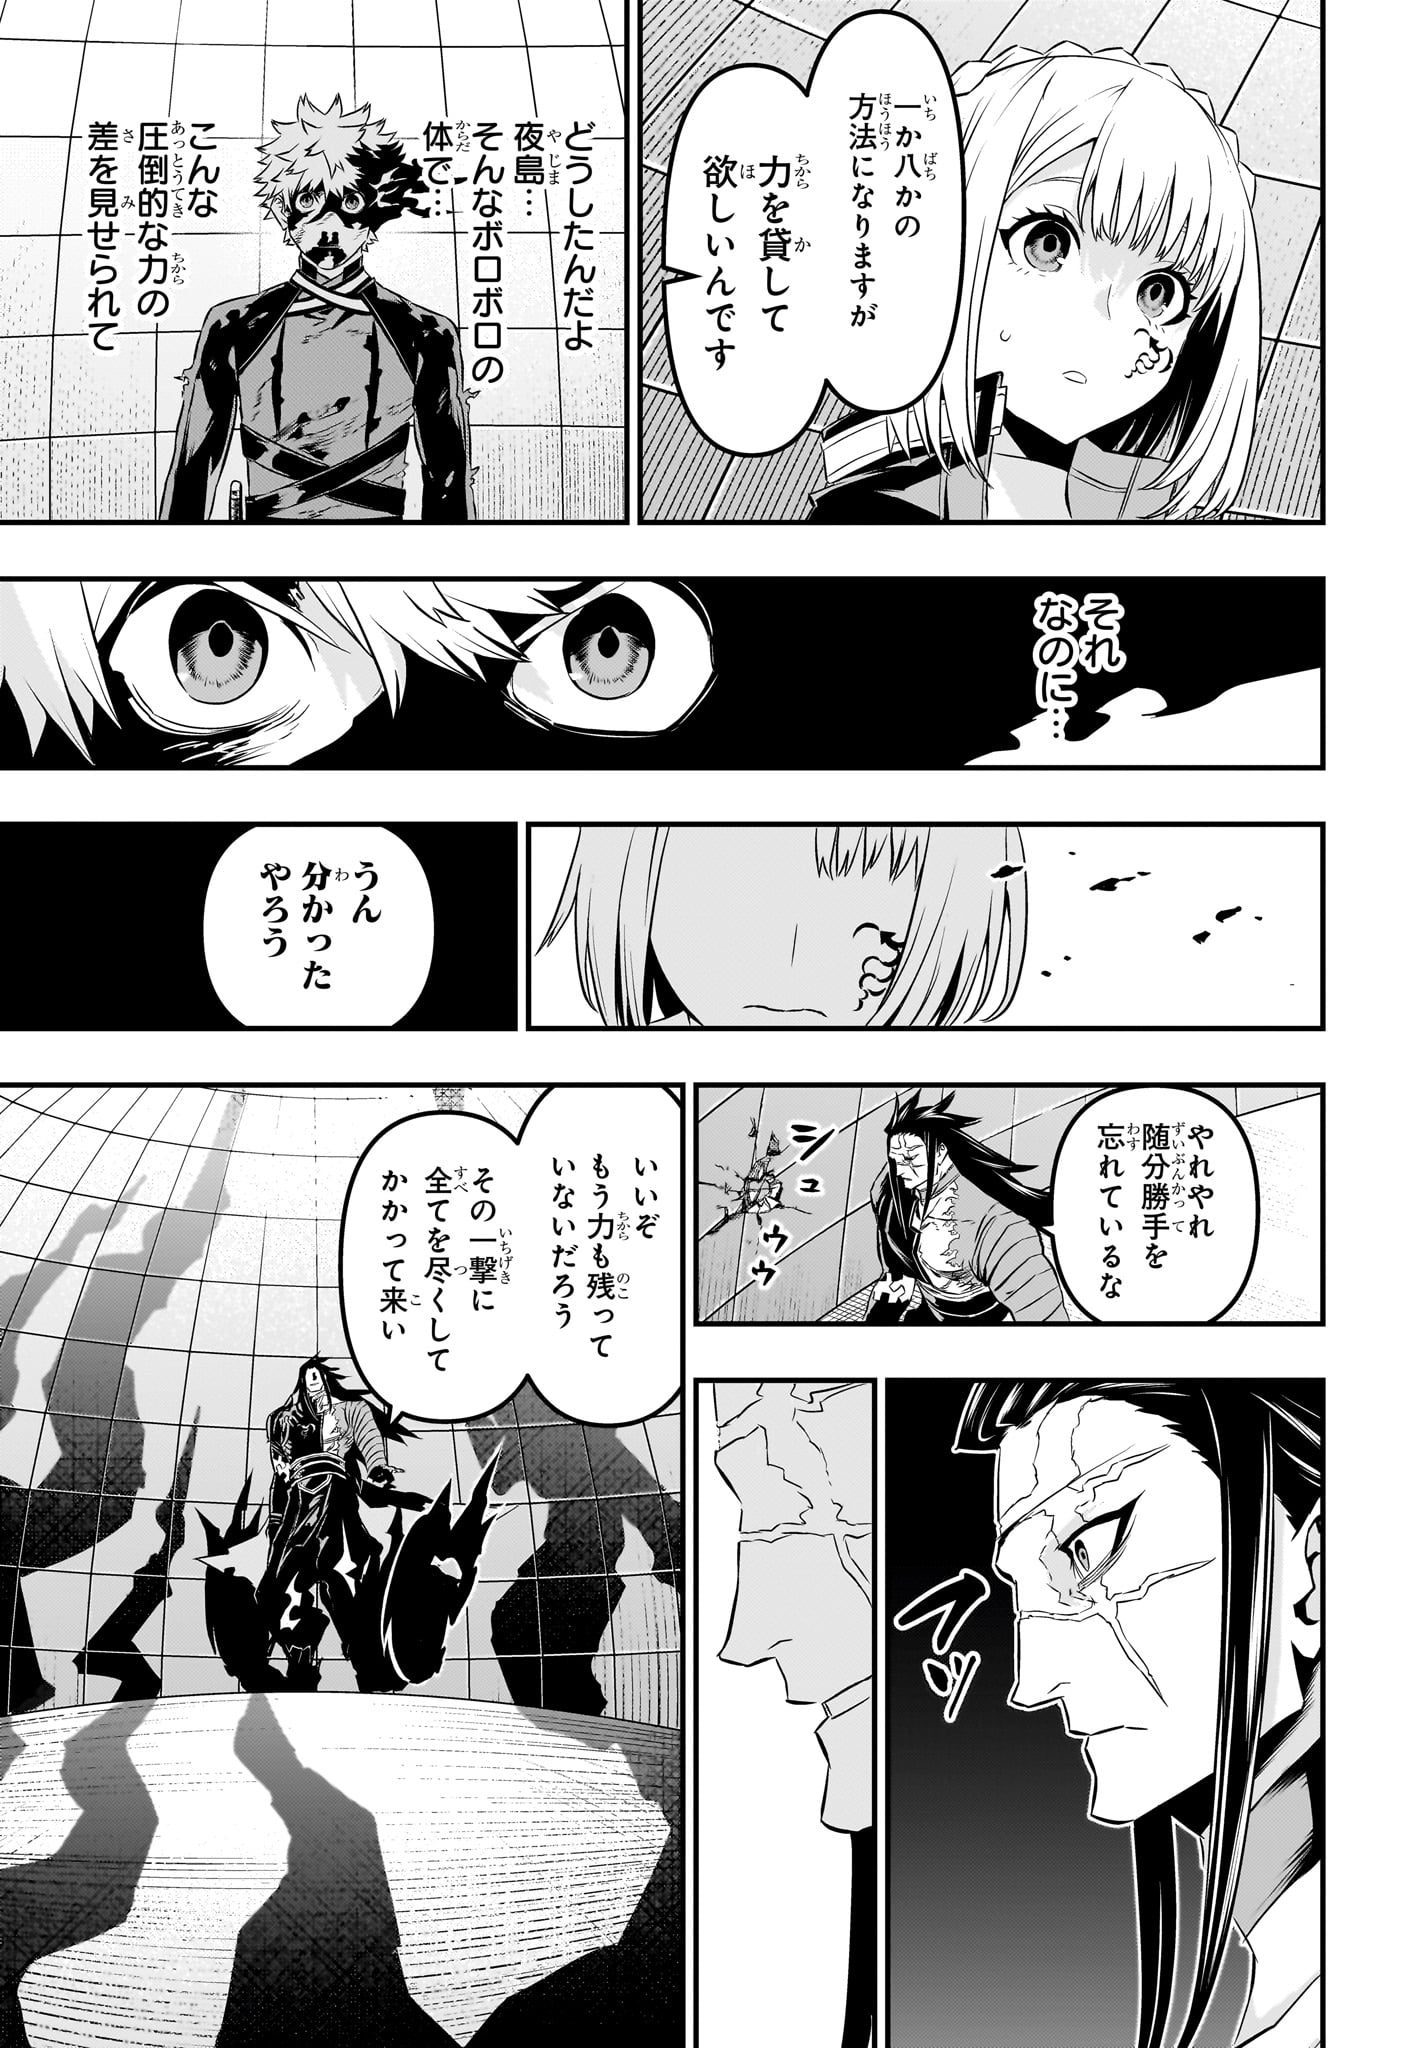 Nue no Onmyouji - Chapter 56 - Page 11